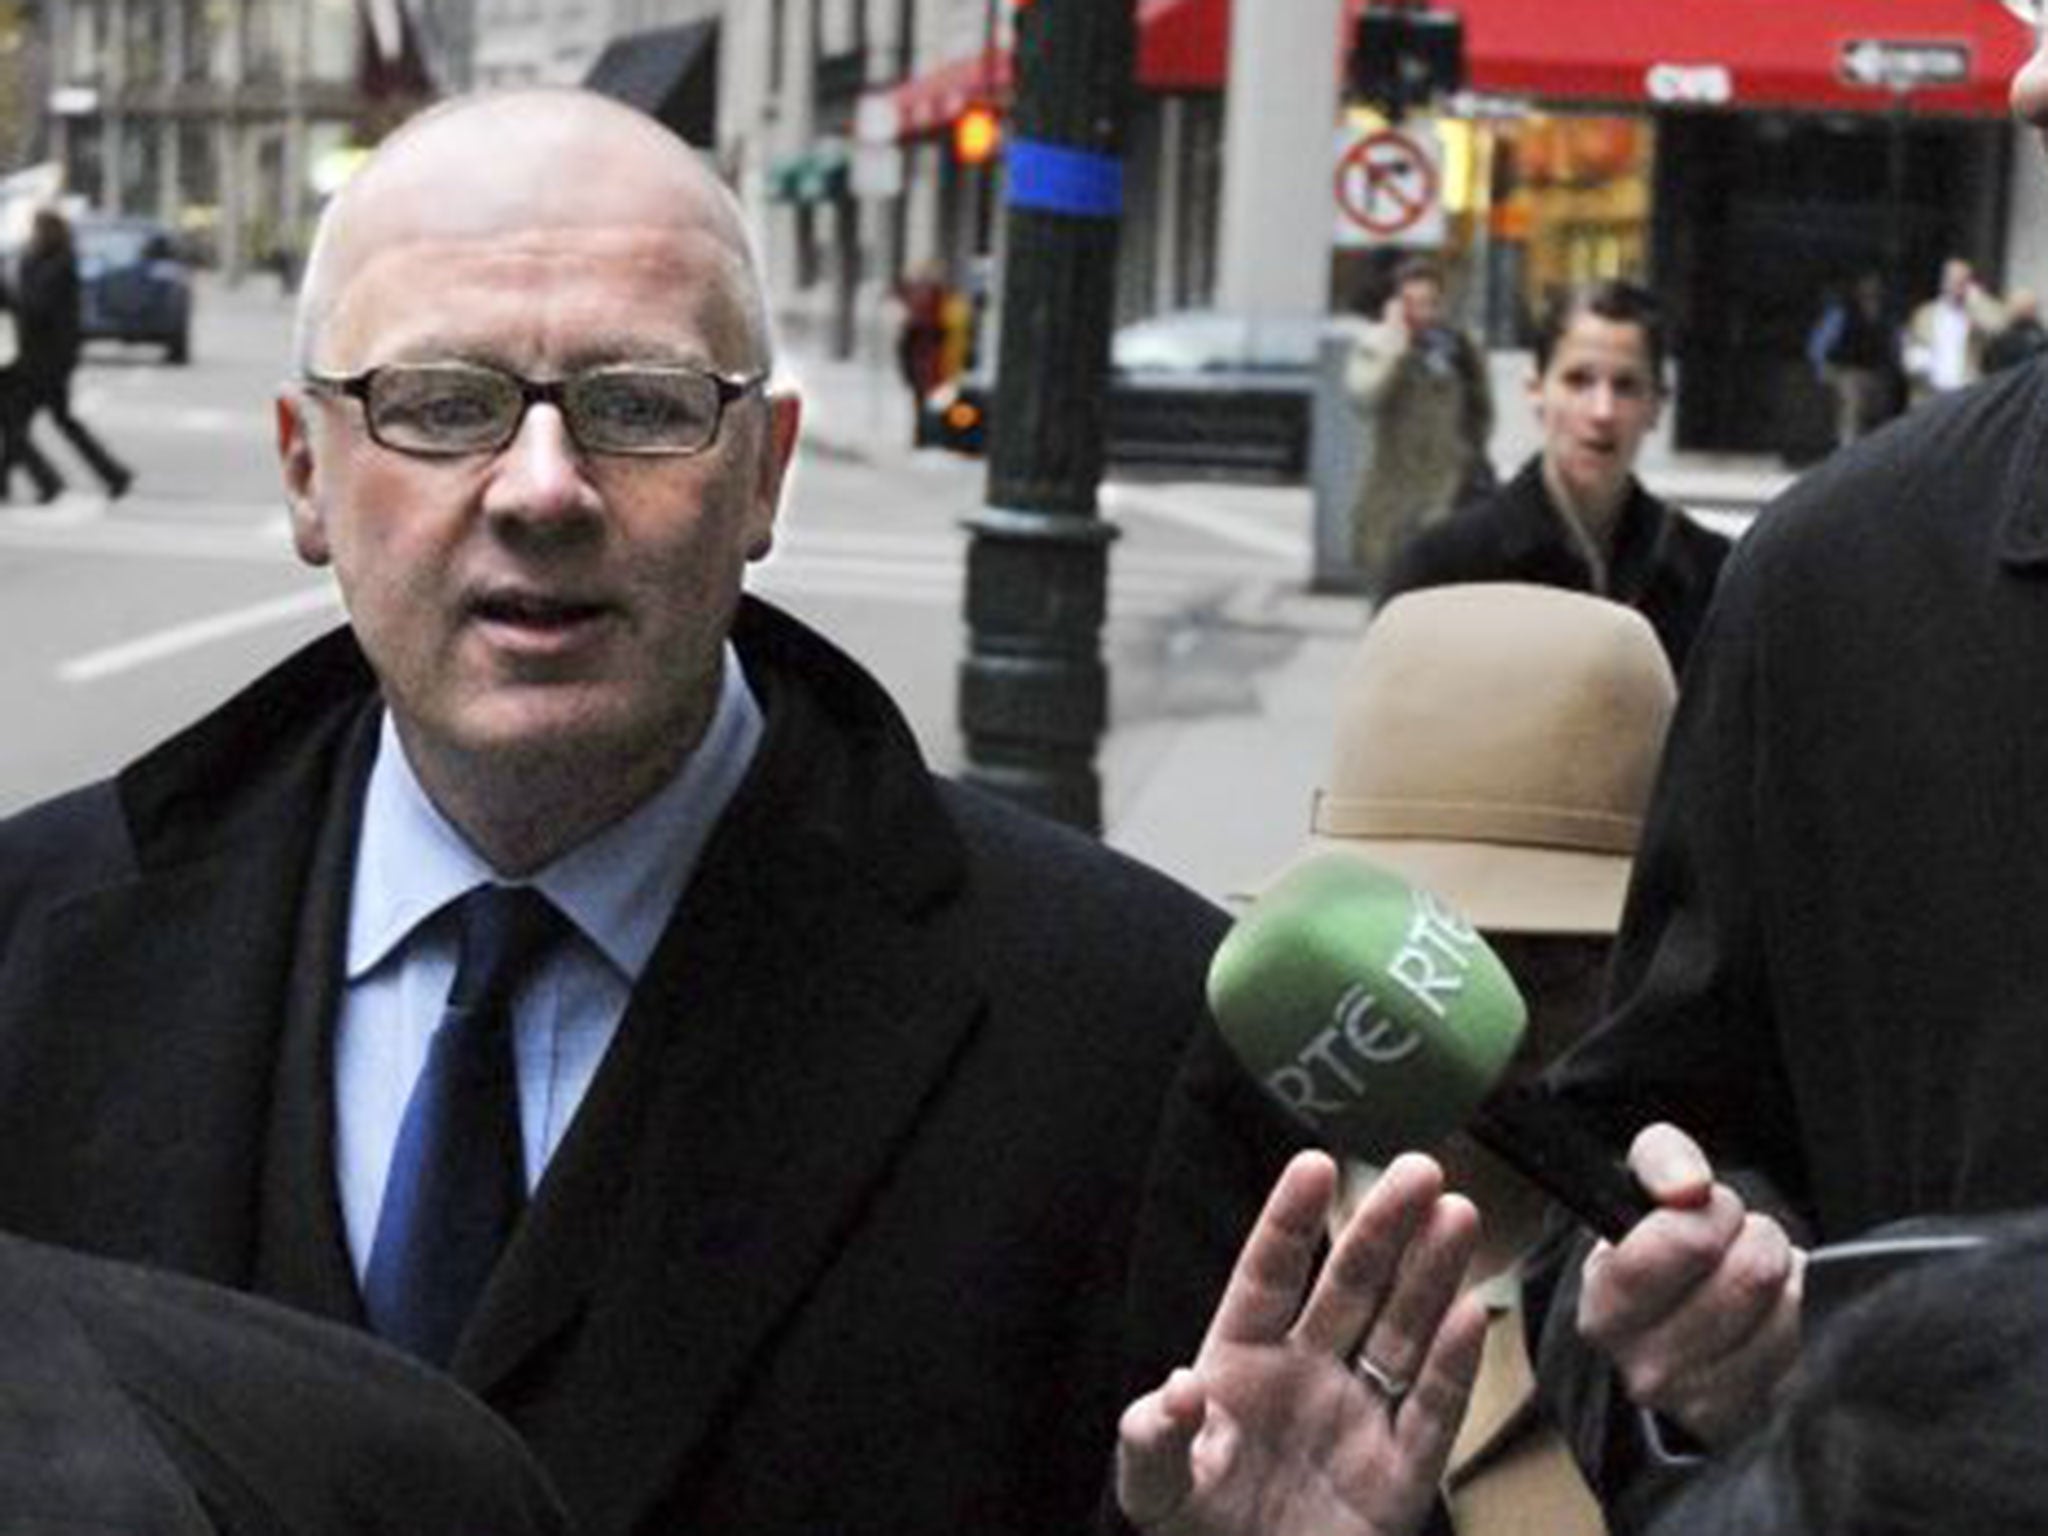 David Drumm was extradited from the US